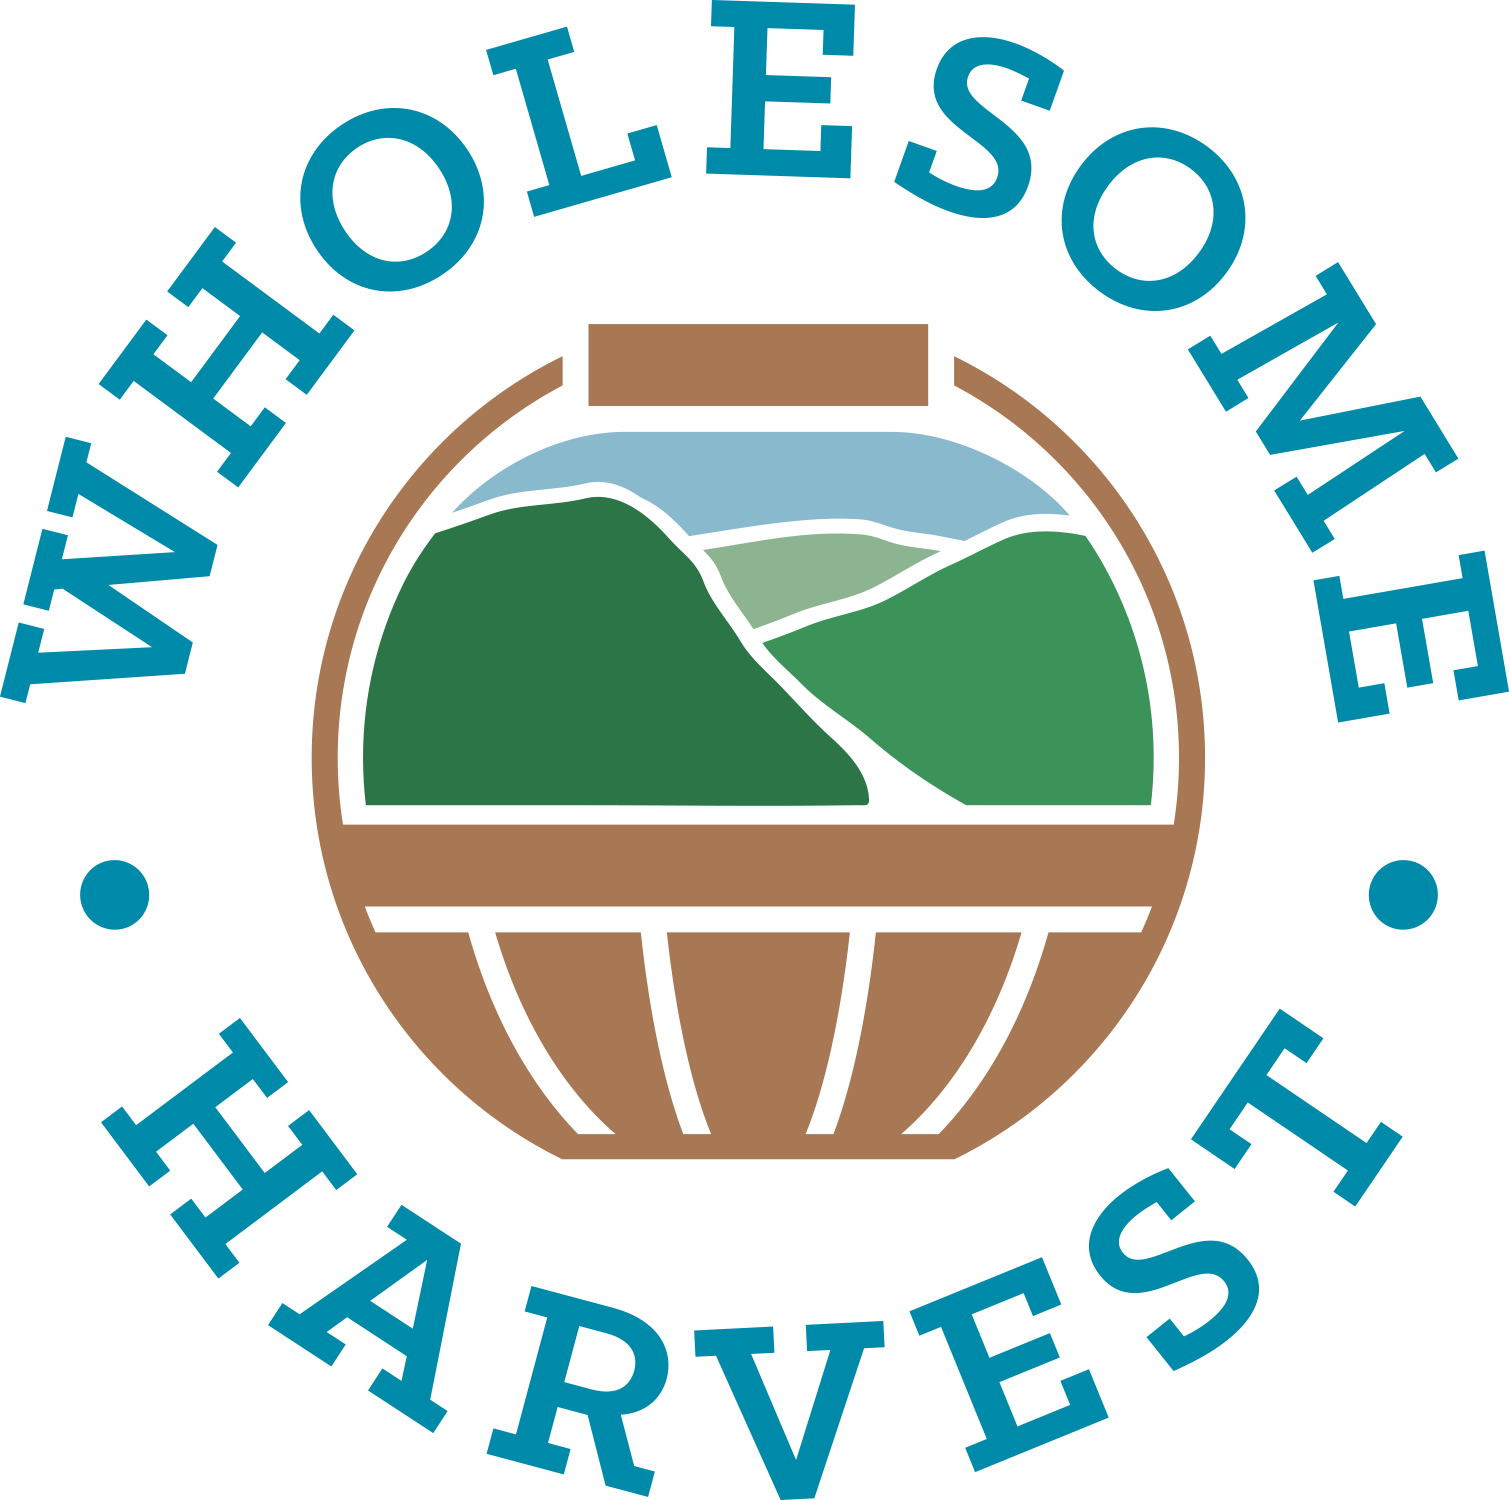 Wholesome Harvest - Wholesome Harvest Bakery (1509x1500)